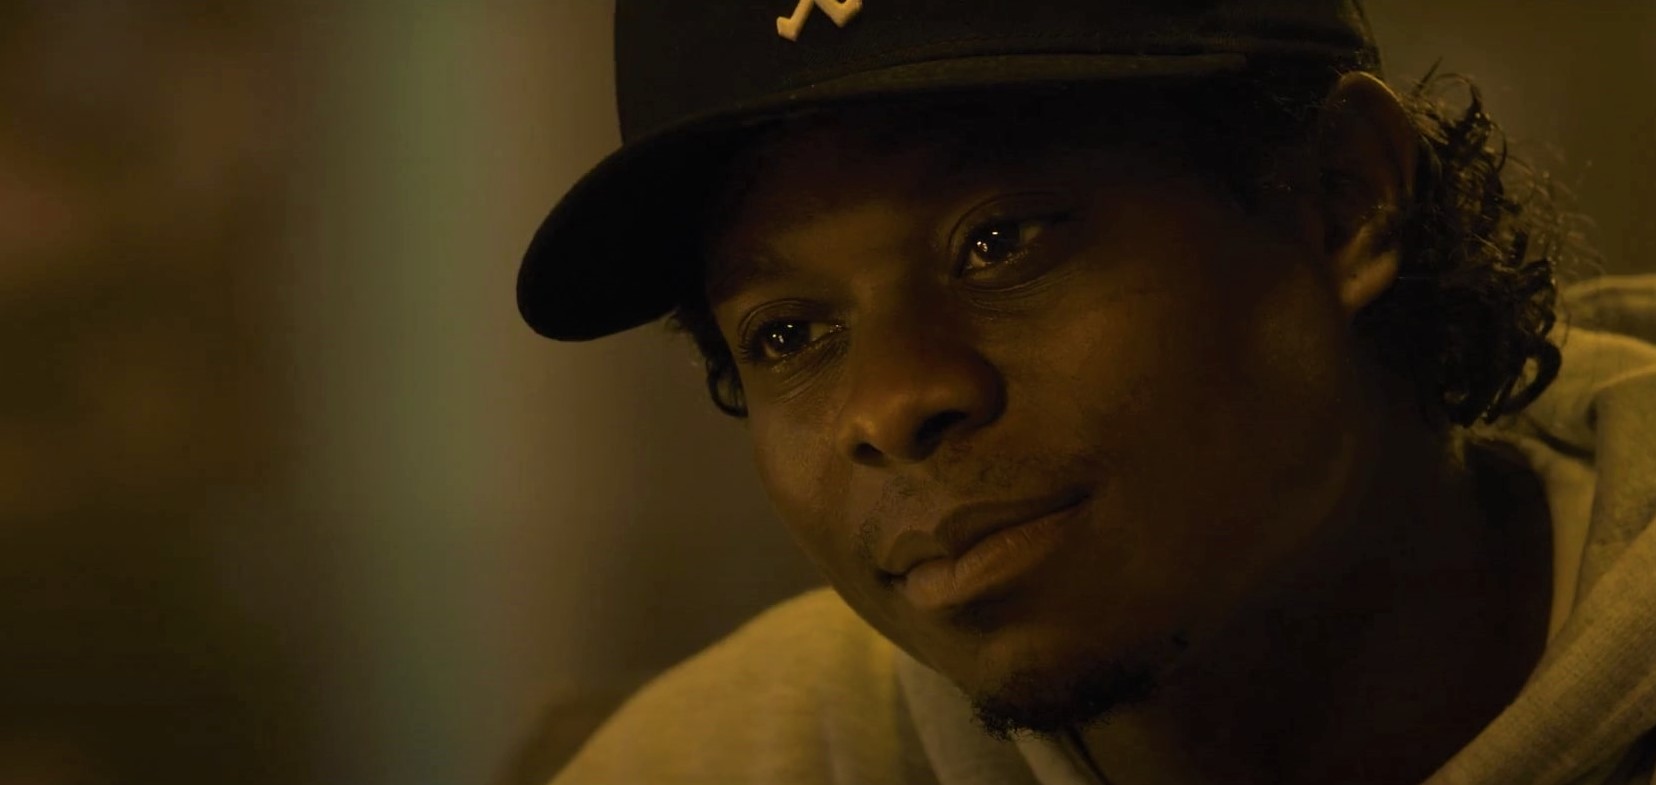 free straight outta compton movie online